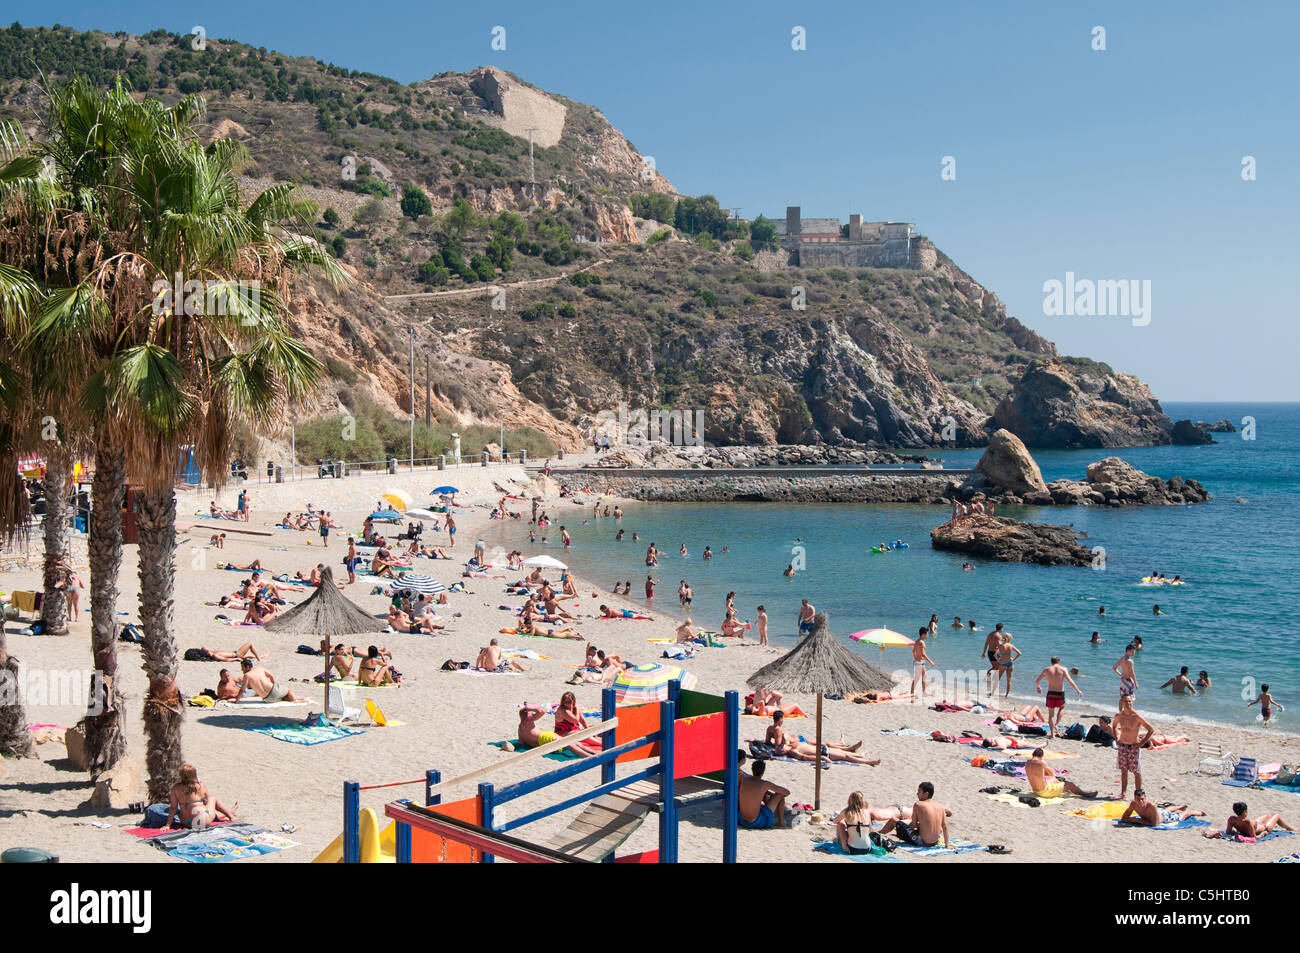 Playa Cala Cortina beach just outside the city of Cartagena in the region  of Murcia, South Eastern Spain Stock Photo - Alamy